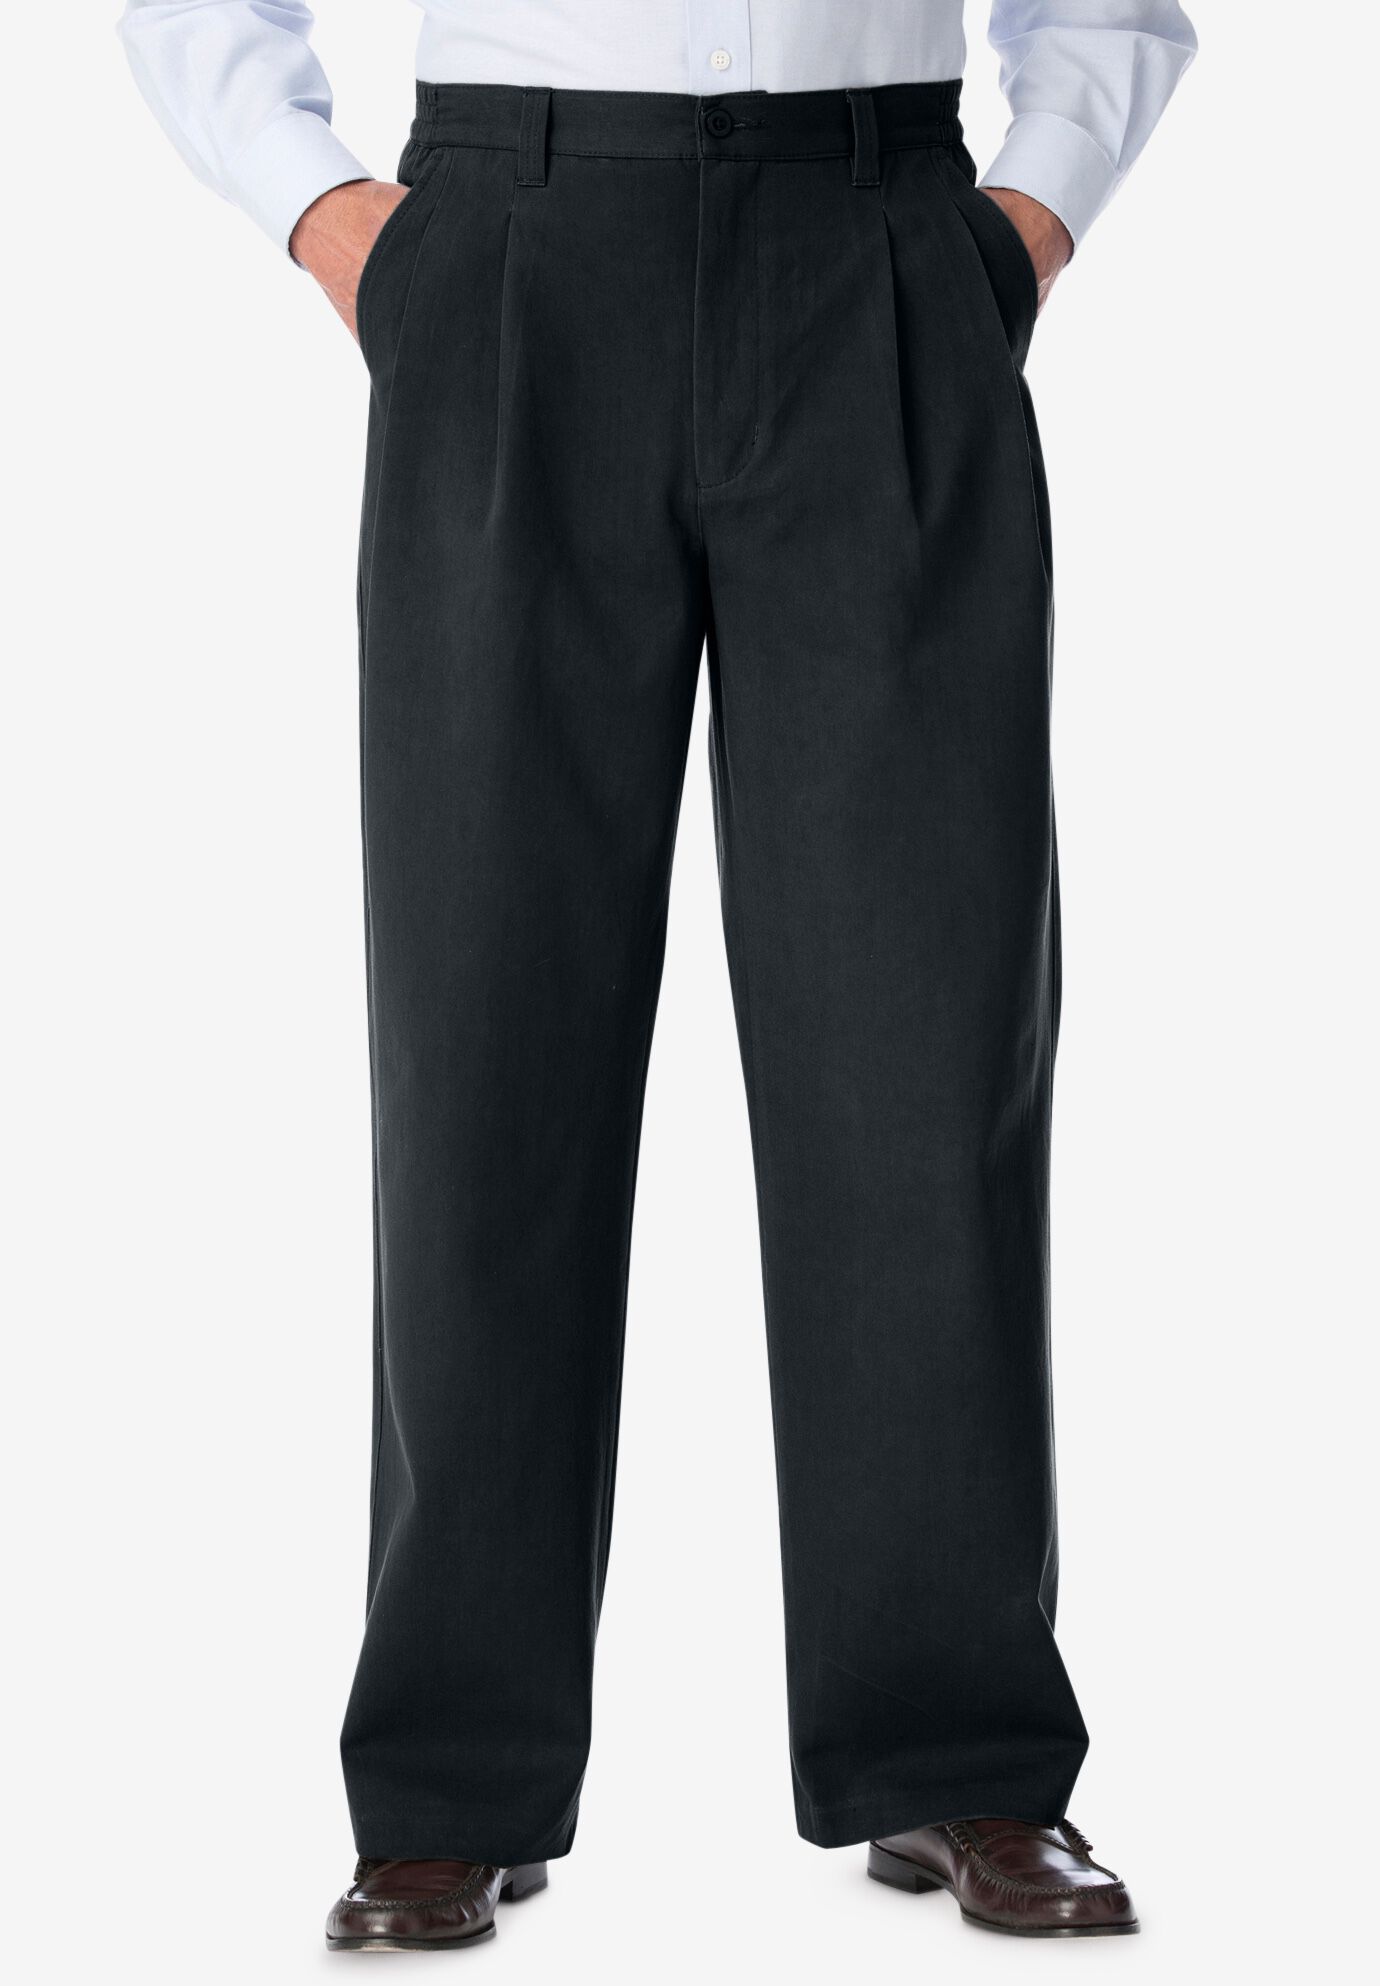 Sir Gregory Men's 100% Wool Fitted Flat Front Tuxedo Pants Formal Satin  Stripe Trousers with Adjustable Waistband Size 27-29 Waist x Unhemmed  Length Black at Amazon Men's Clothing store